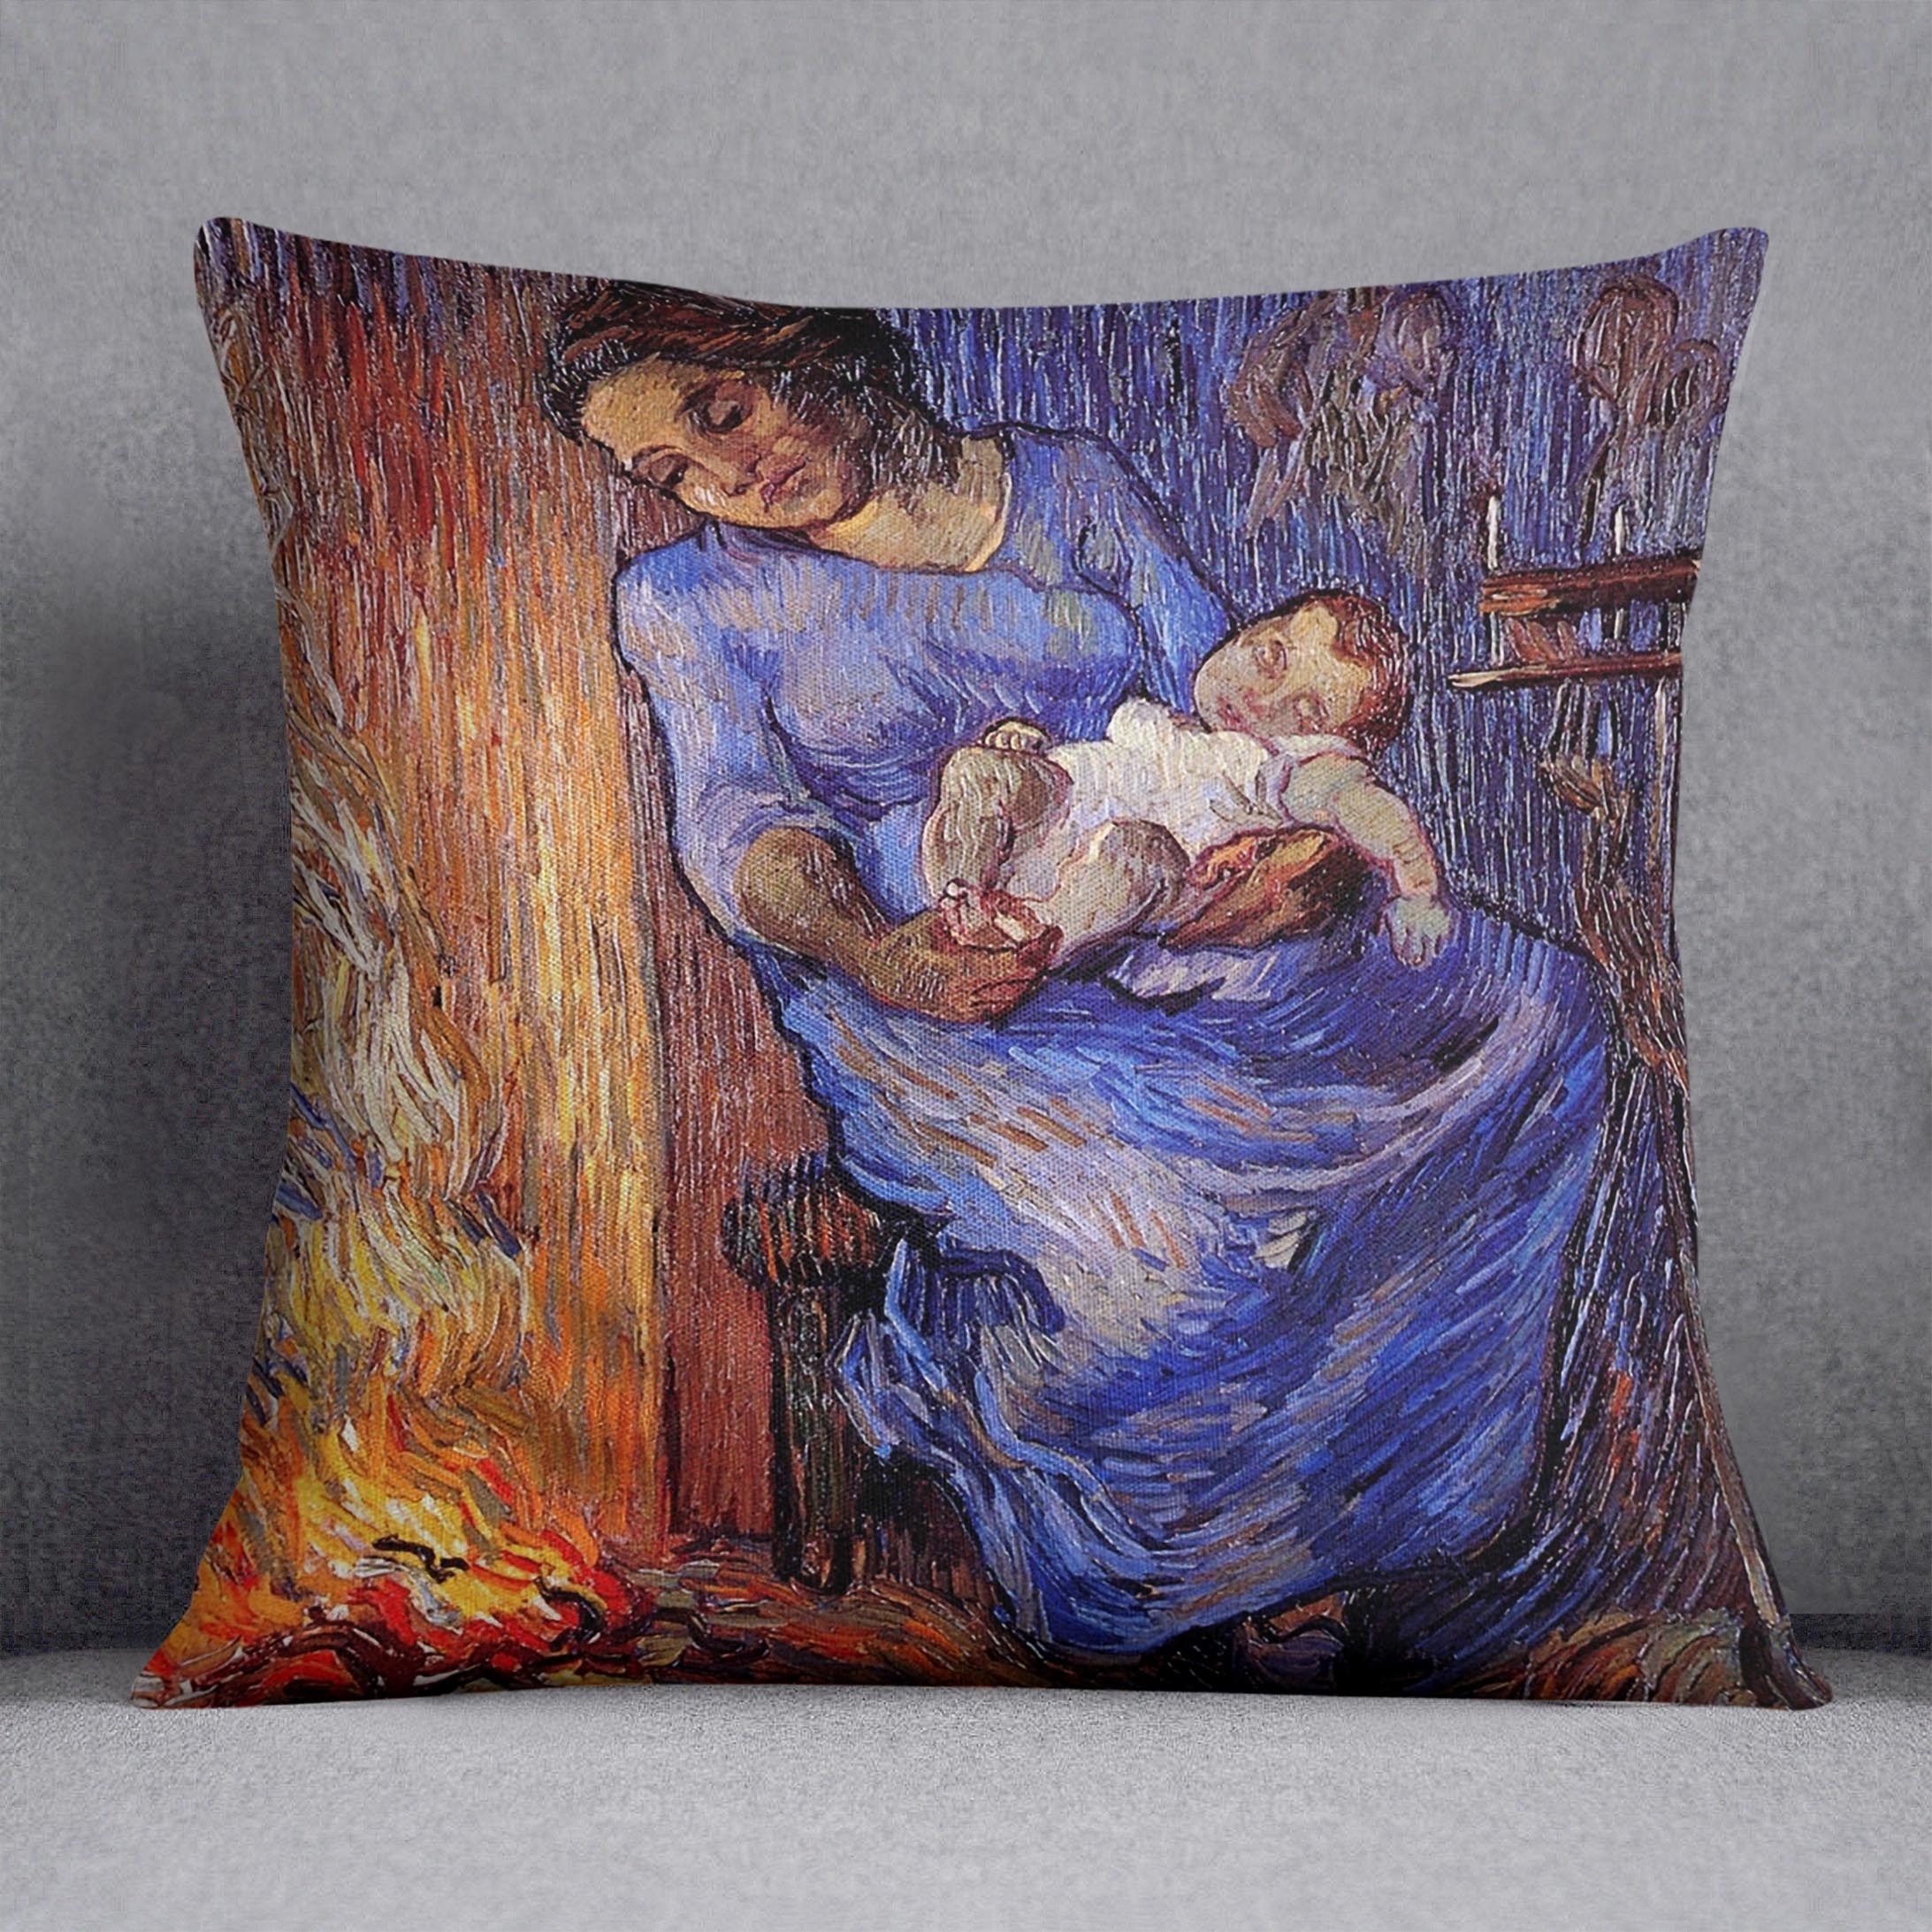 The Man is at Sea after Demont-Breton by Van Gogh Cushion